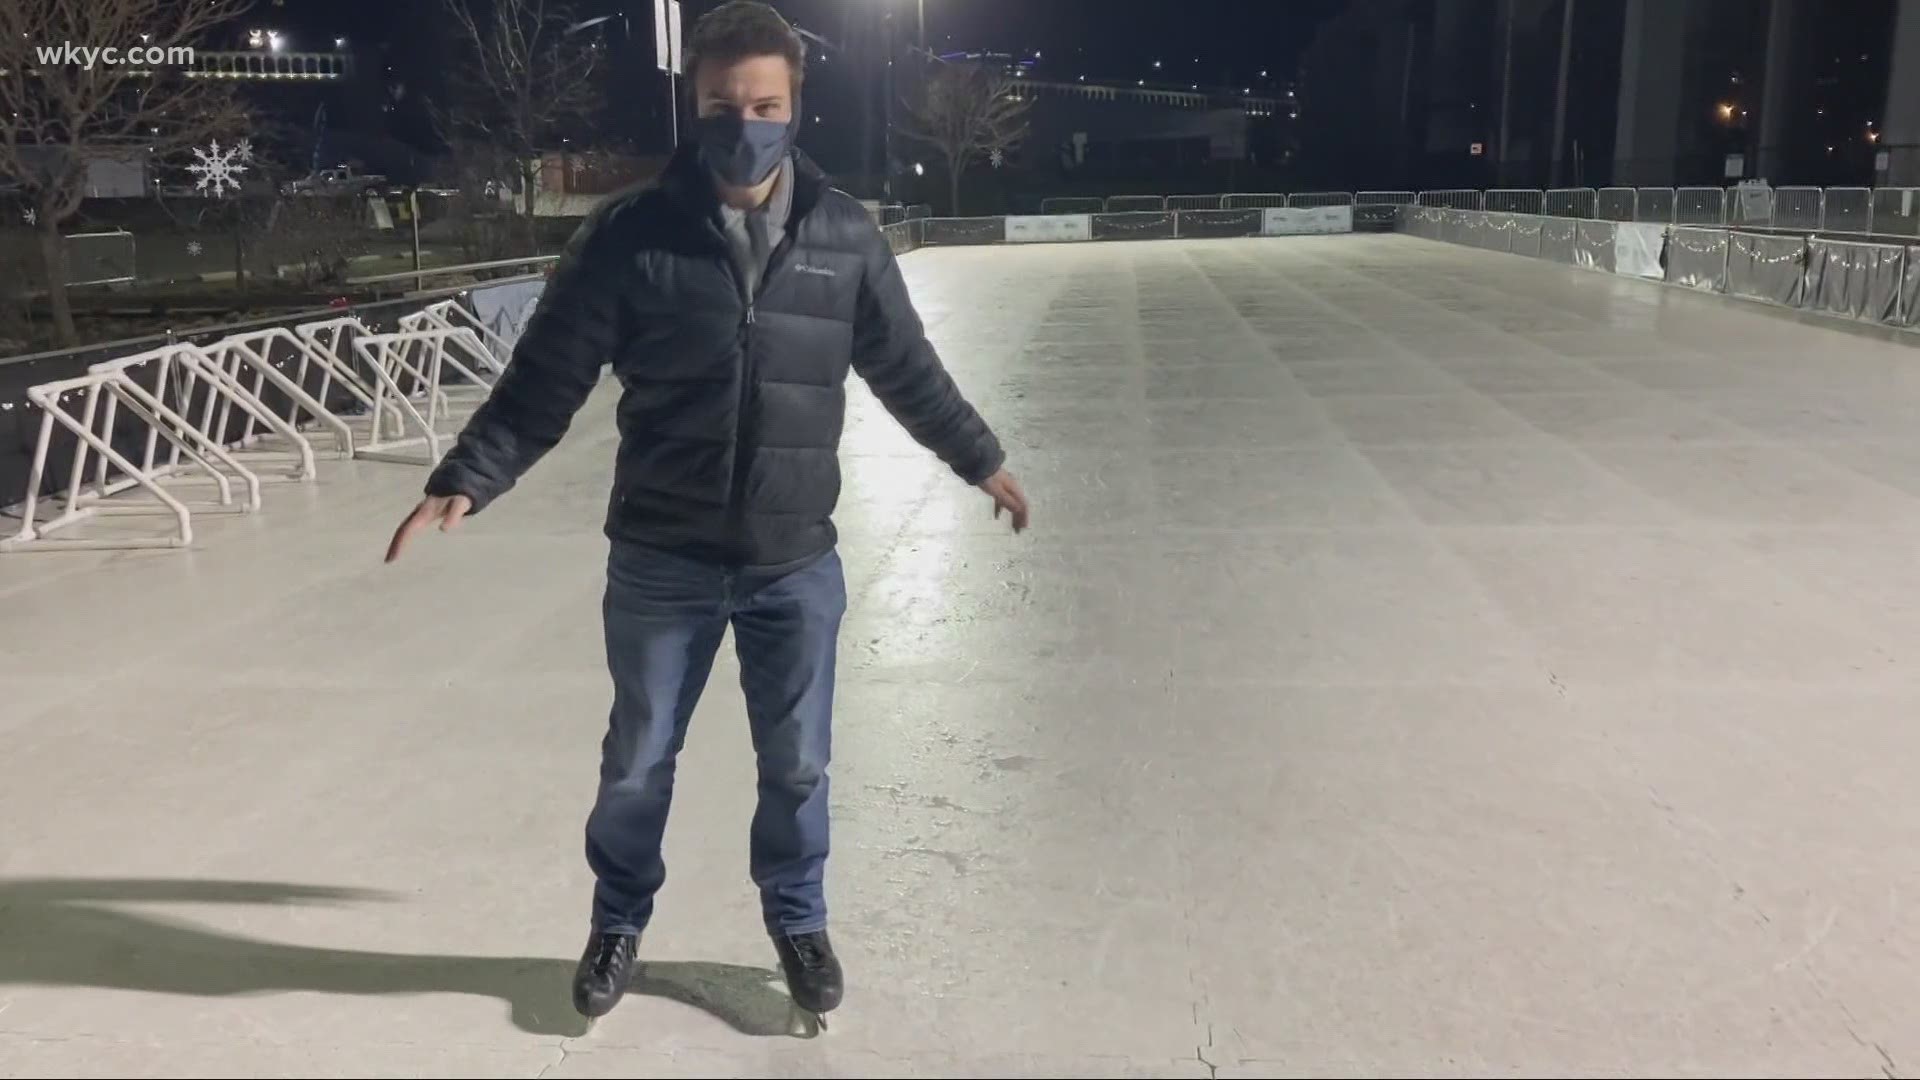 Strap on those ice skates and hit the rink! 3News' Matt Standridge takes us on his next GO-HIO adventure at the Merwin's Wharf synthetic skating rink.